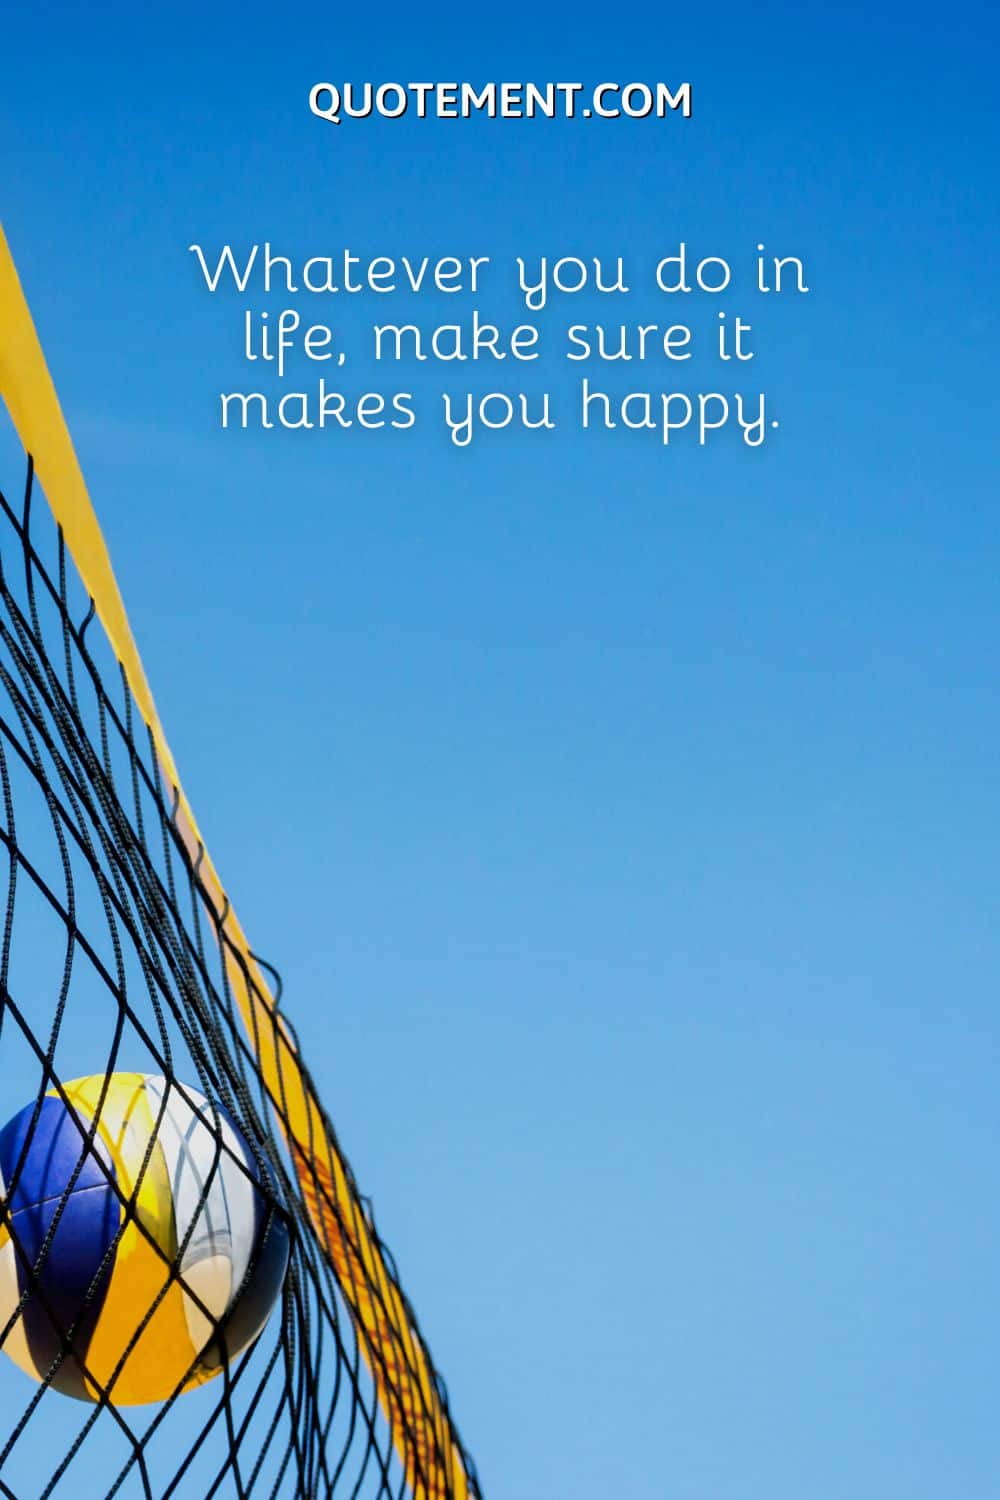 Whatever you do in life, make sure it makes you happy.